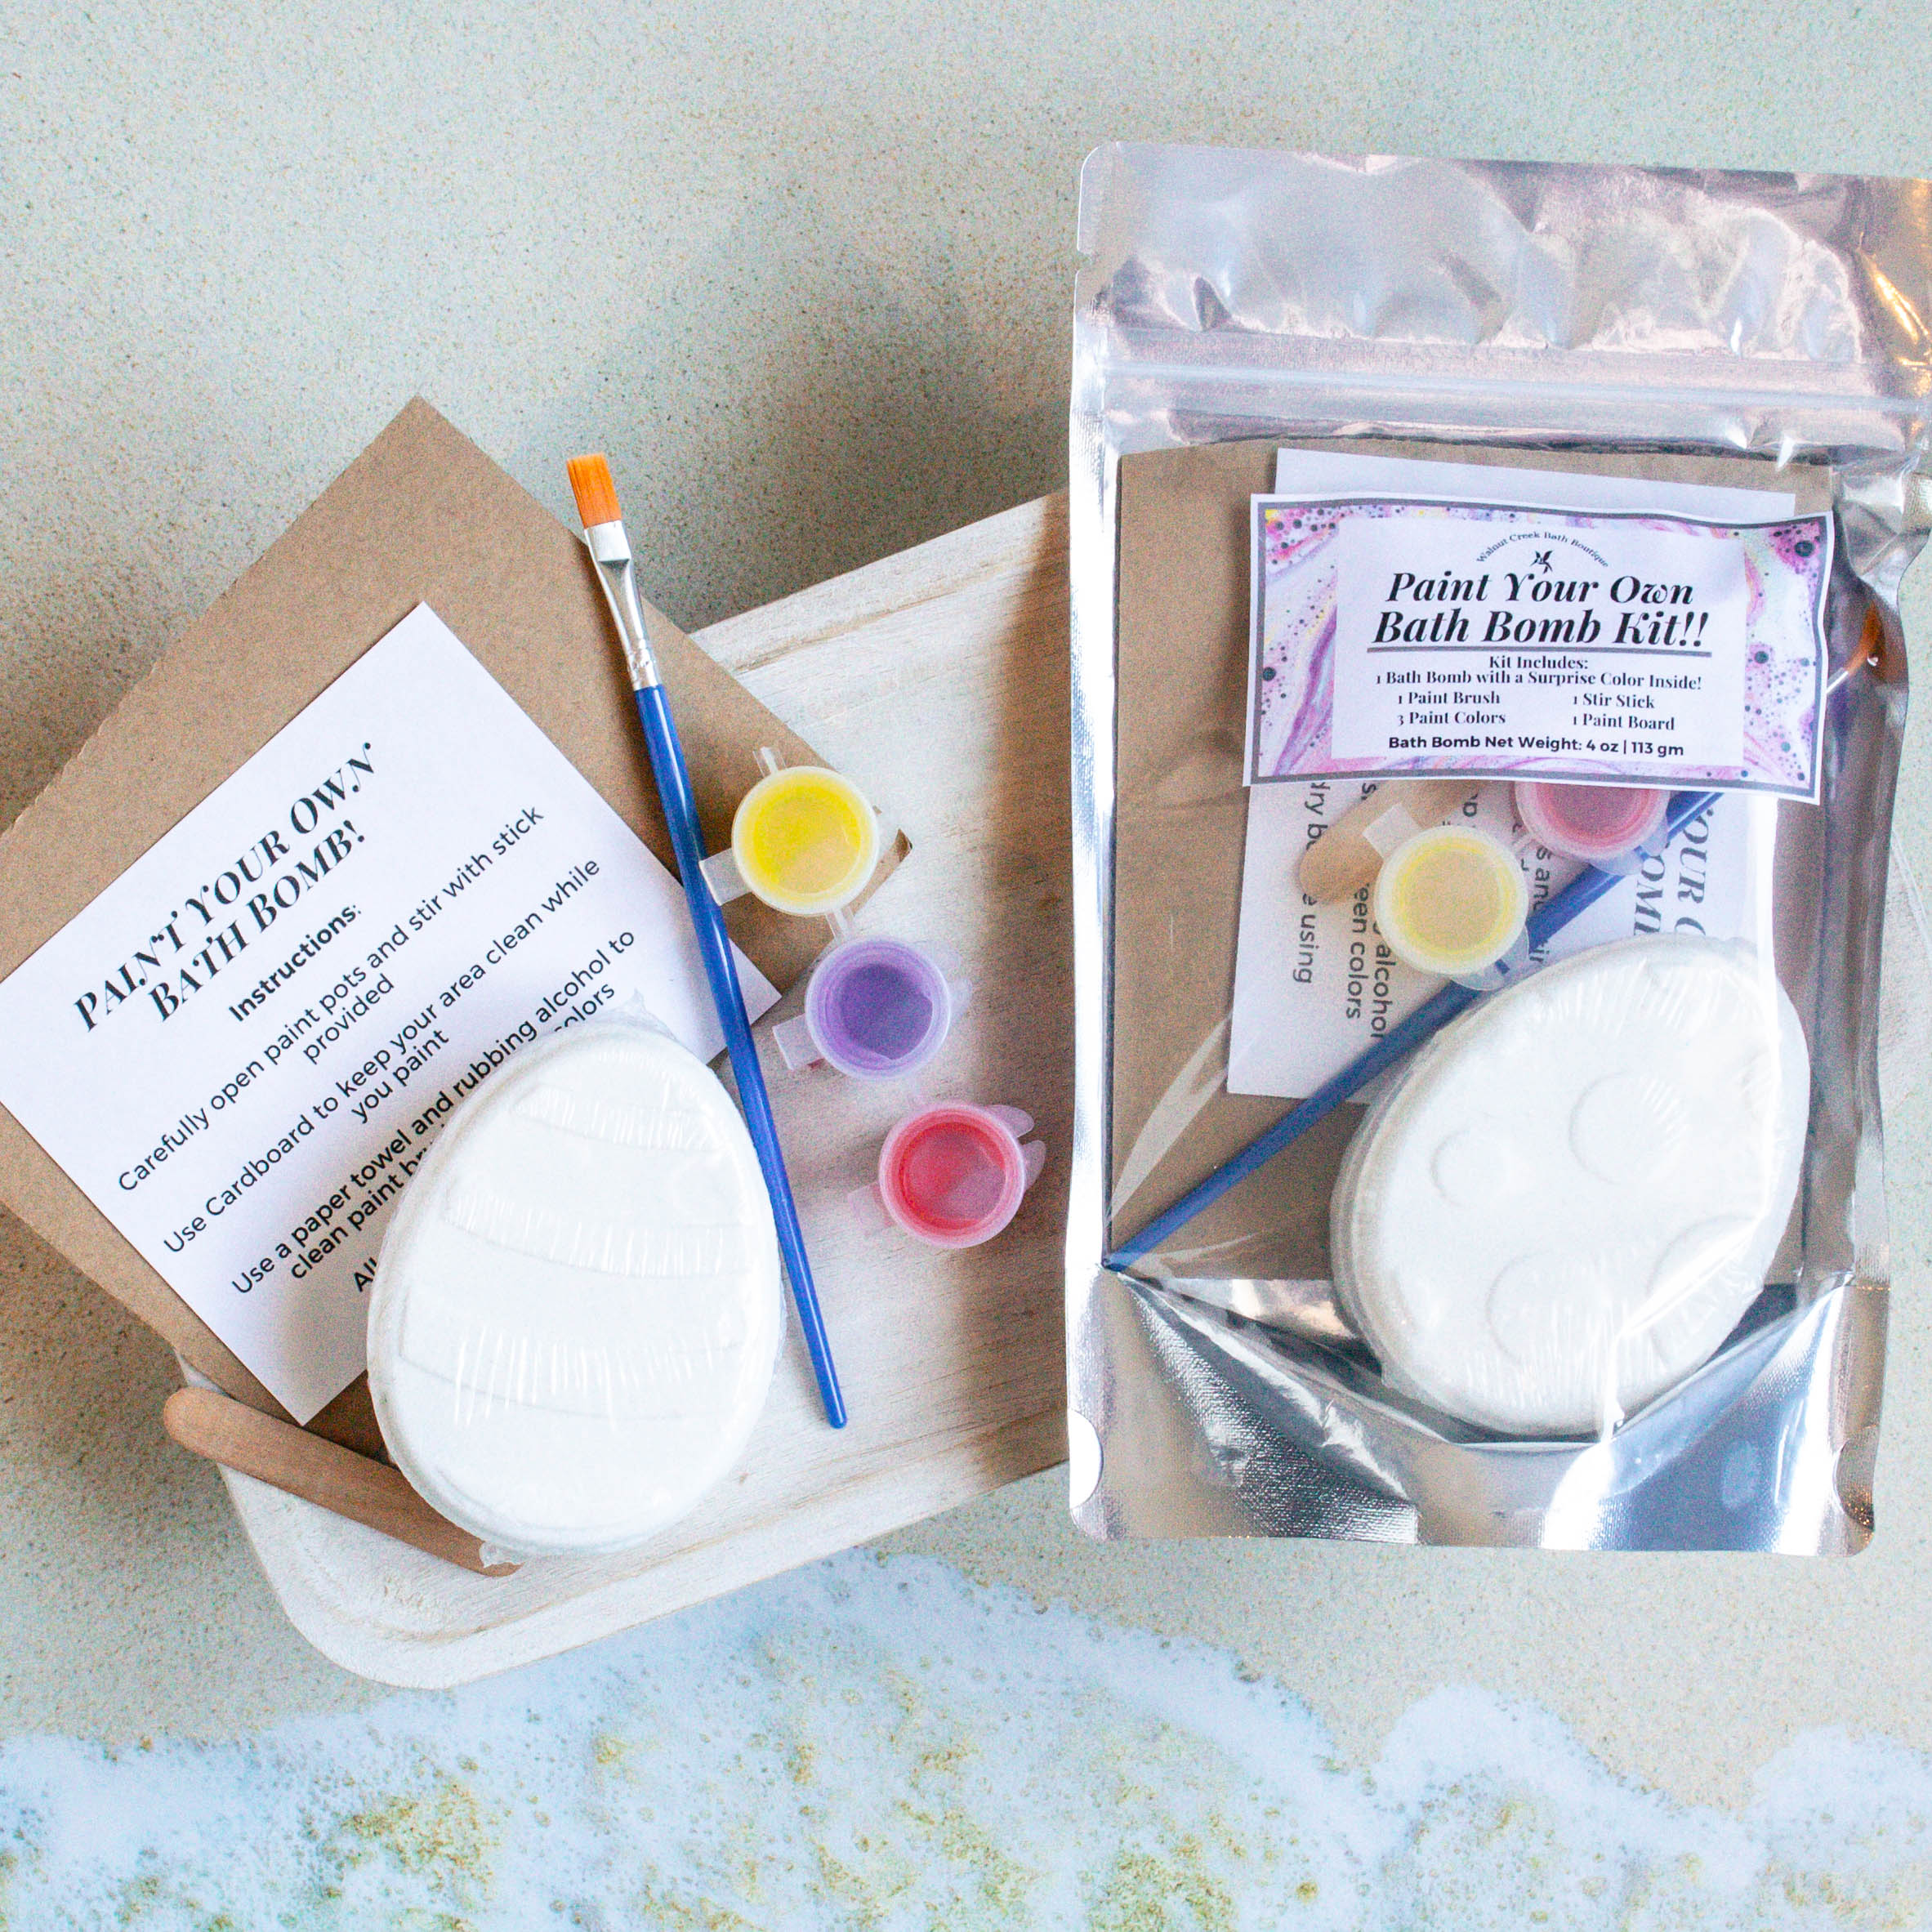 there is a bag of the easter bath bomb kit to the right of the contents splayed out. the Easter egg along with a paint brush, paint pots of red, purple and yellow skin safe colorants as the pain. they are sitting on a piece of cardboard along with the instruction sheet and a stir stick.there is an image of waves crashing on the bottom of the frame.